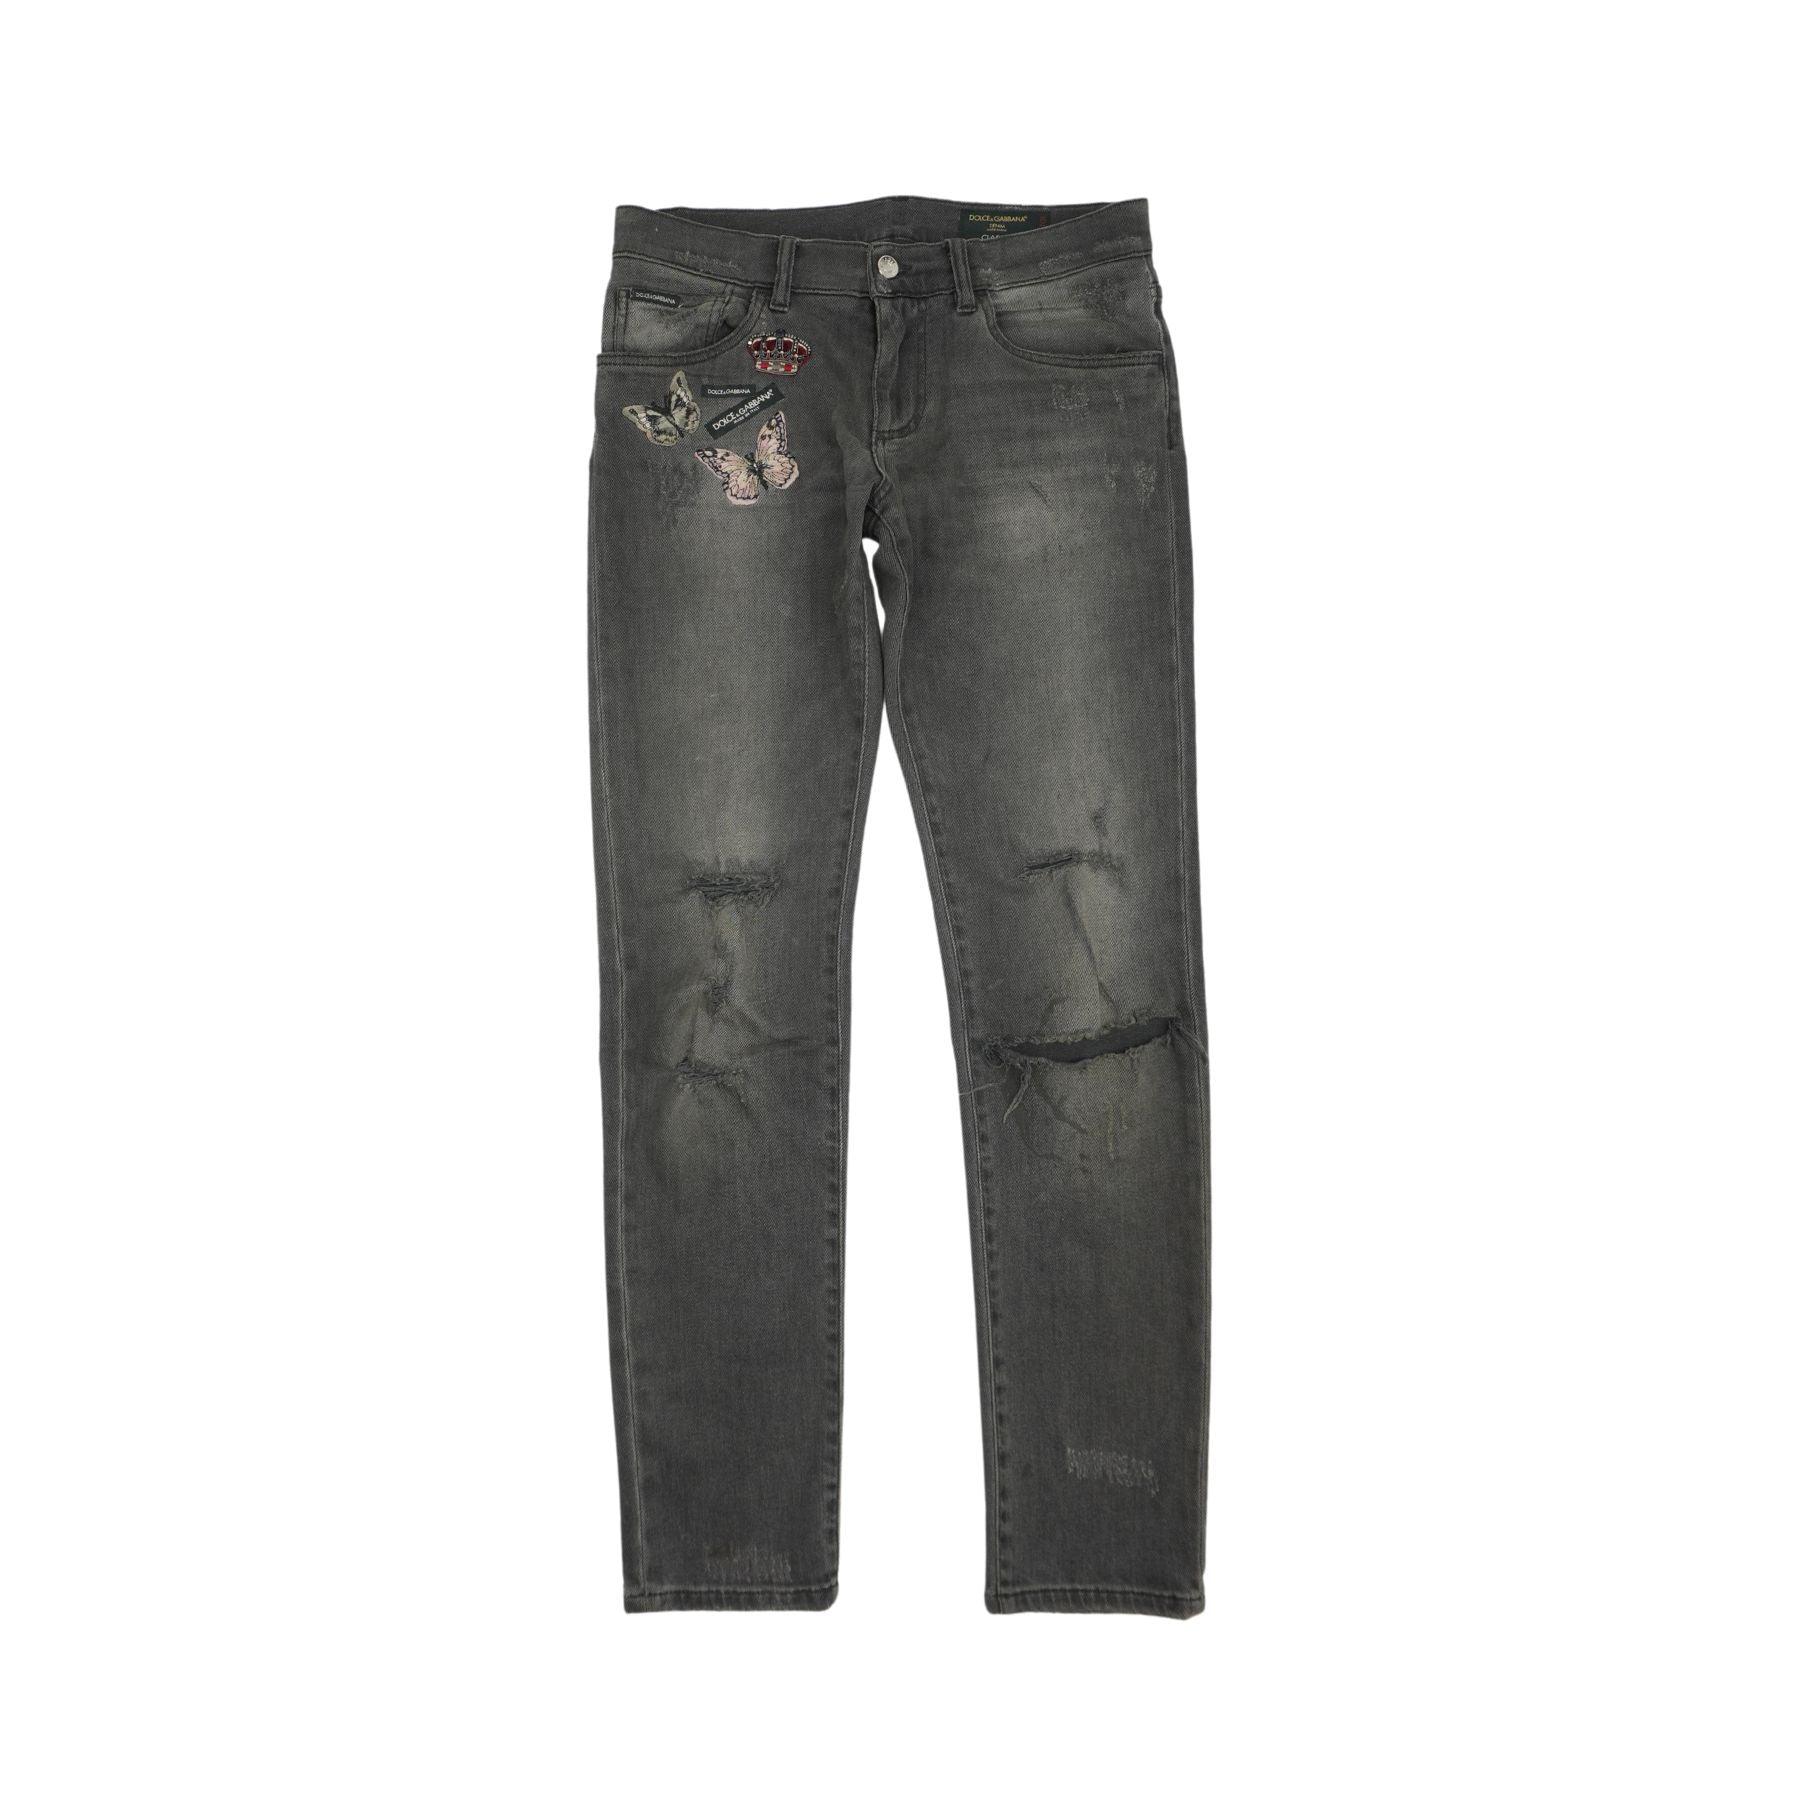 Dolce & Gabbana Jeans - Women's 46 - Fashionably Yours